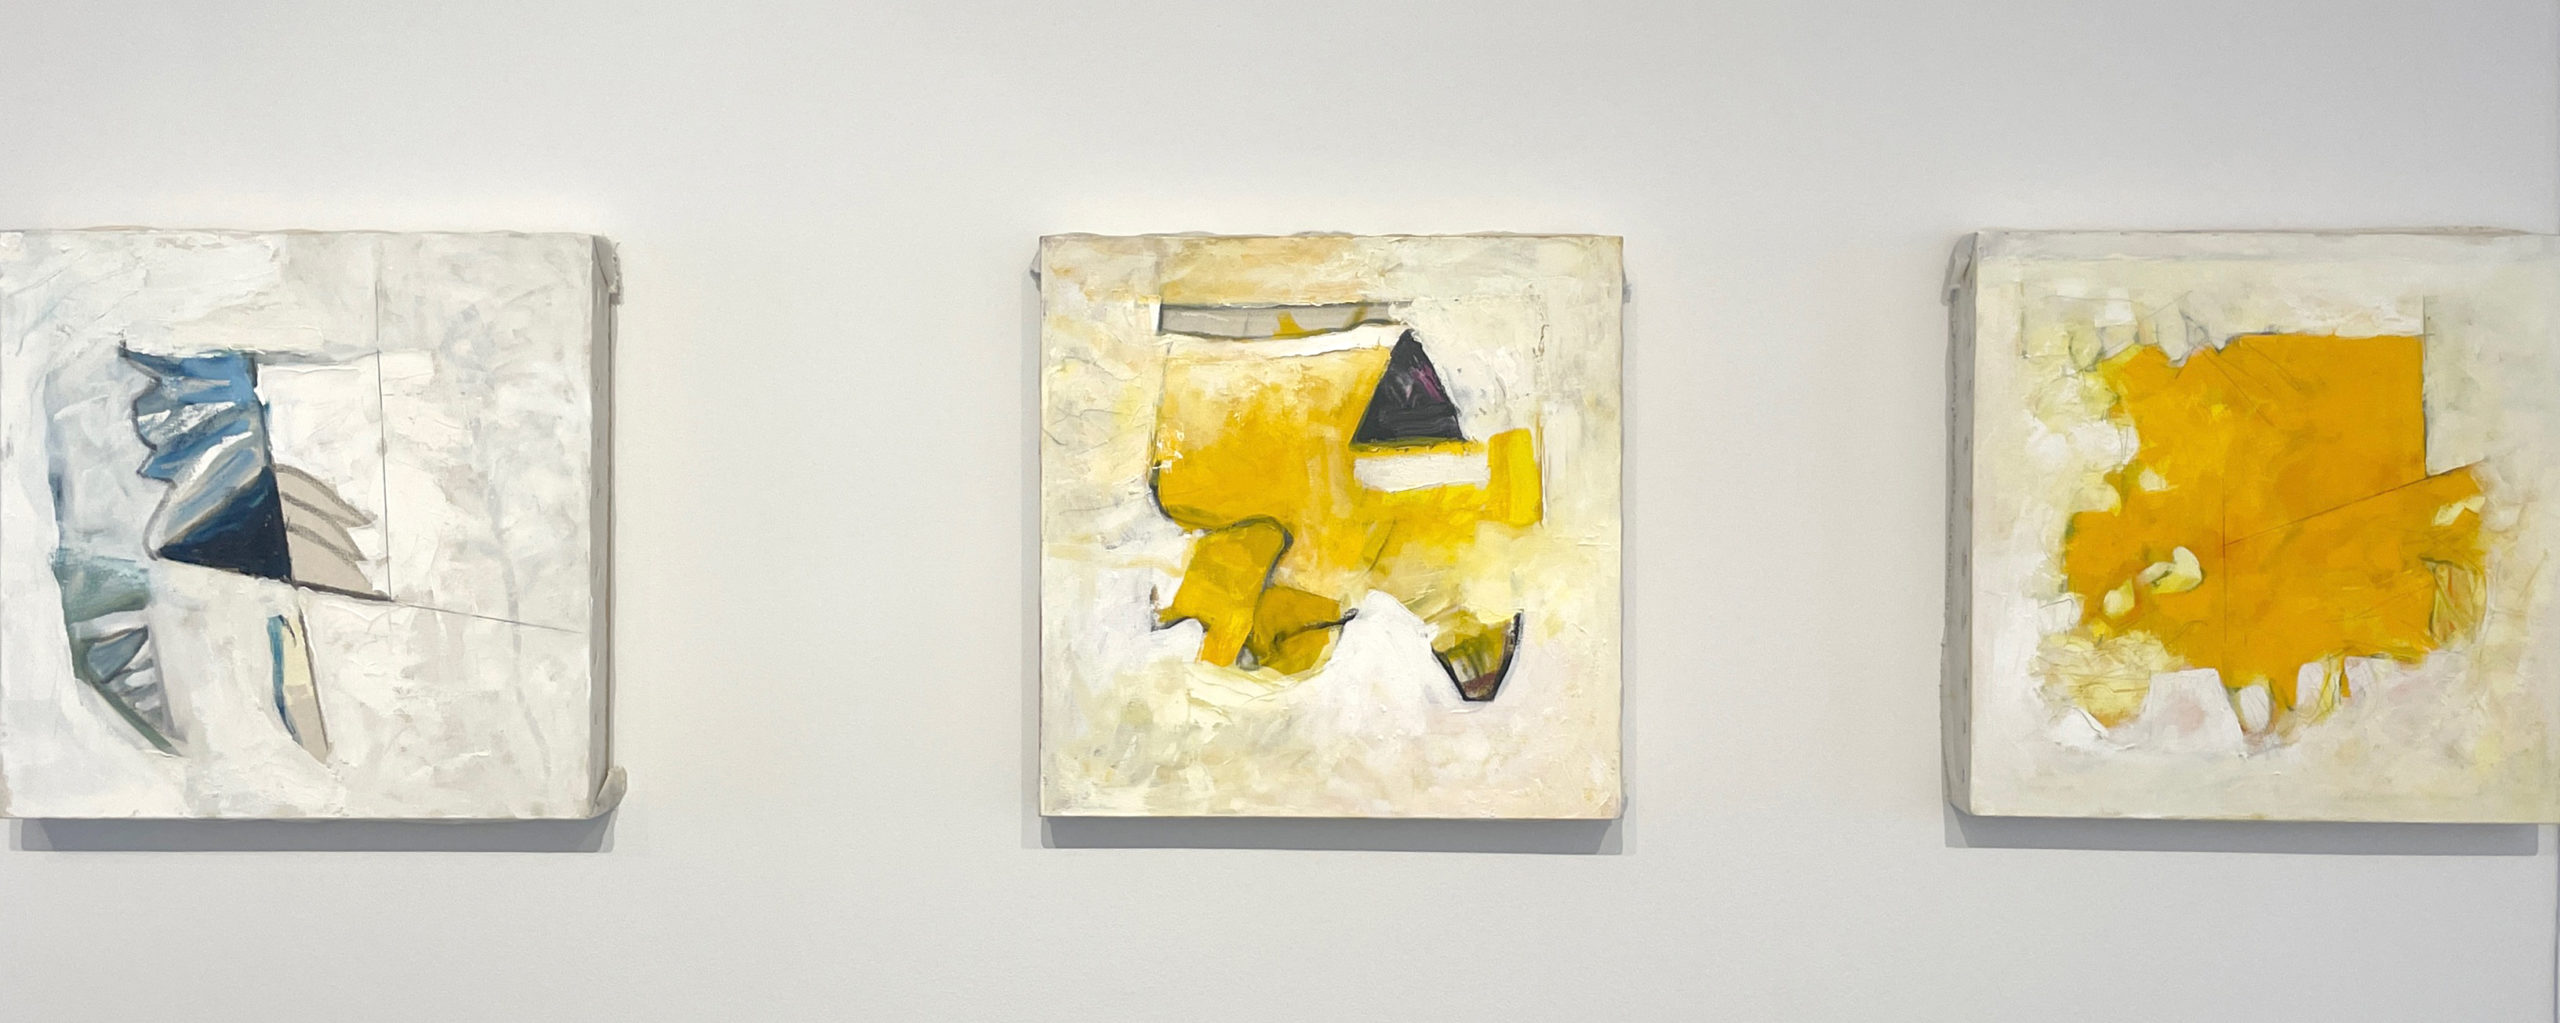 Lee Kelly | Late Paintings With Elephant | Image 3/5